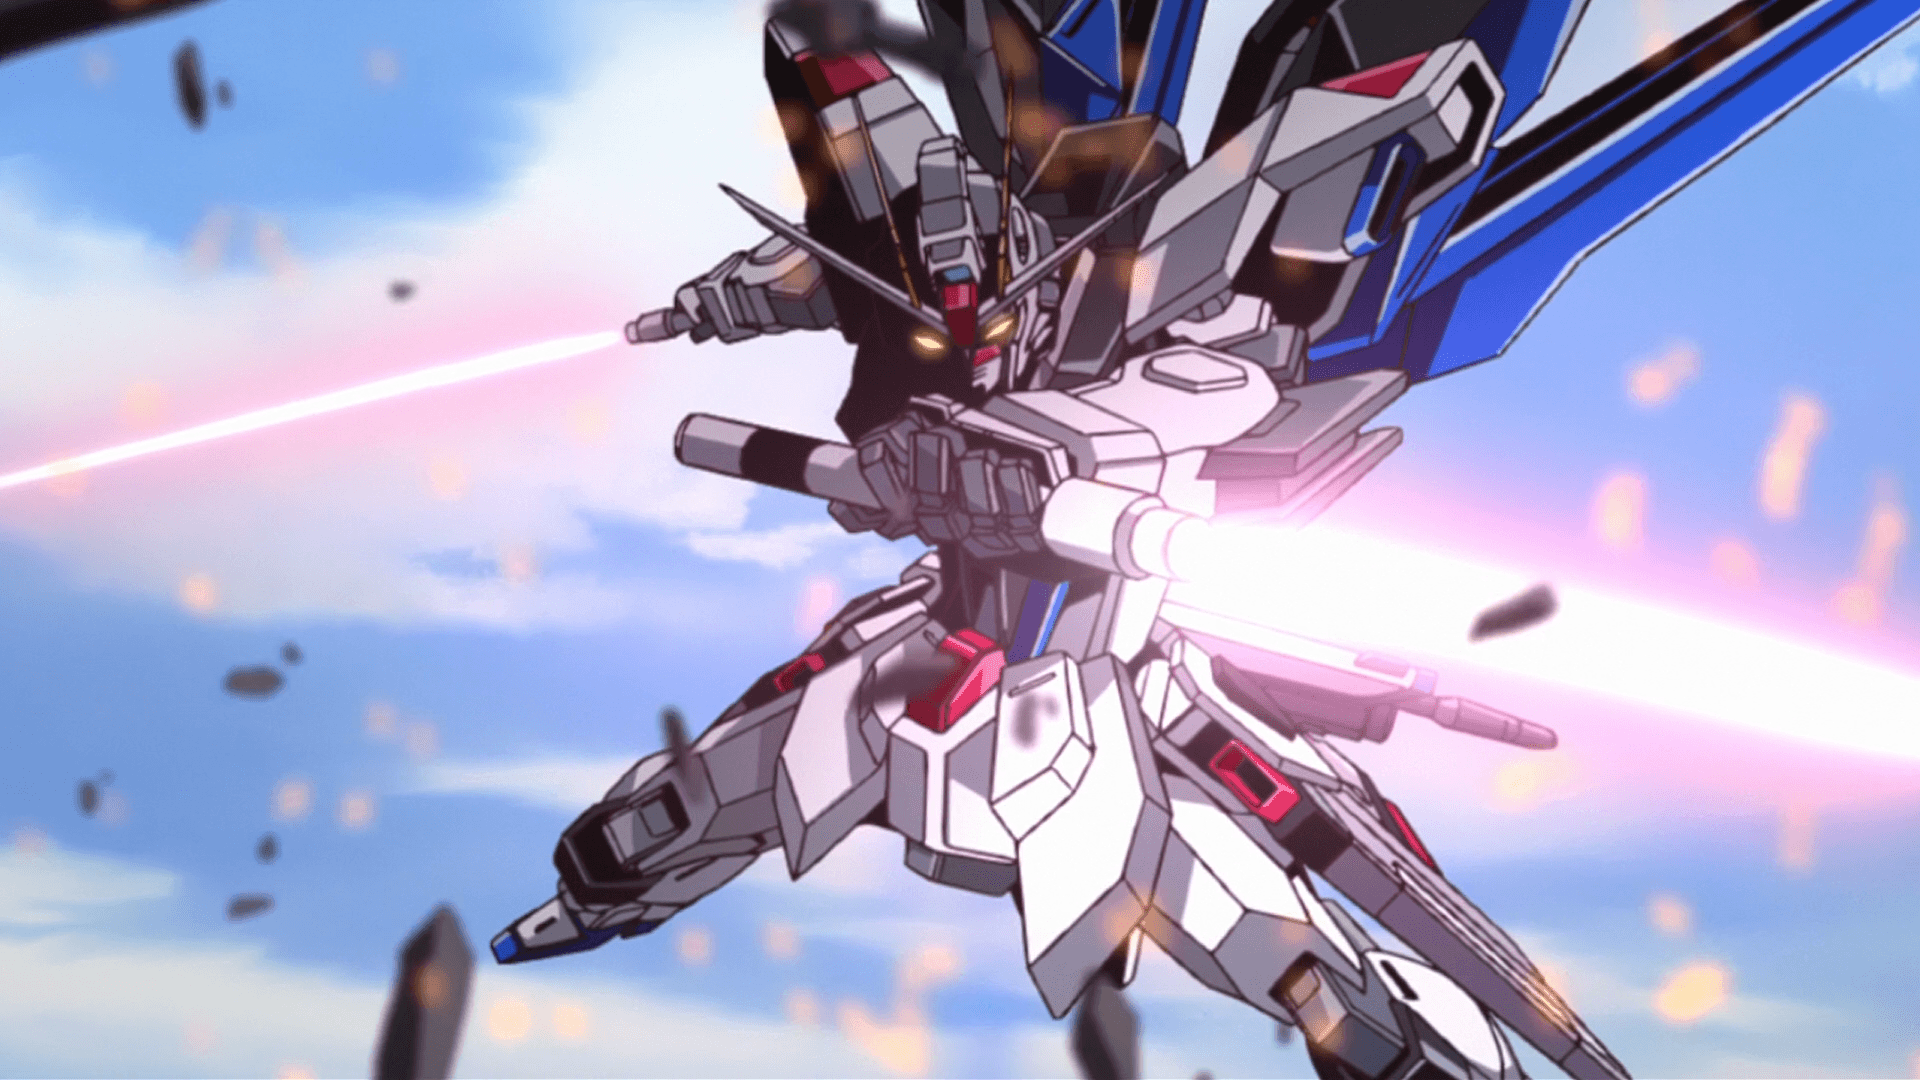 Spoilers][Re Watch] Mobile Suit Gundam Seed Destiny Overall